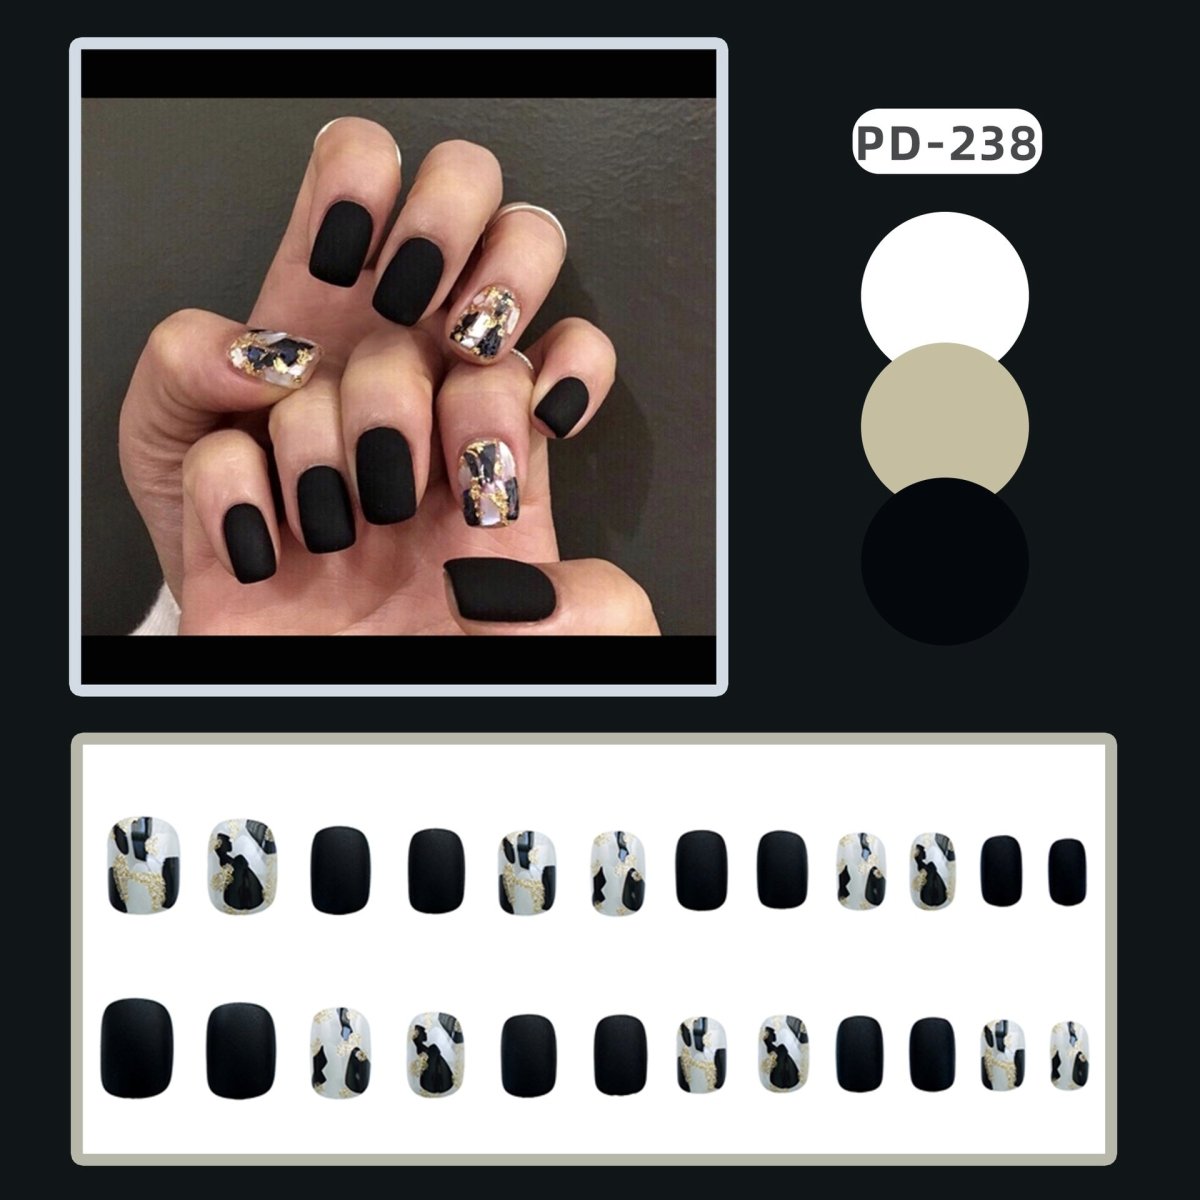 Wearing Black Frosted Shell Fake Nails - TapLike